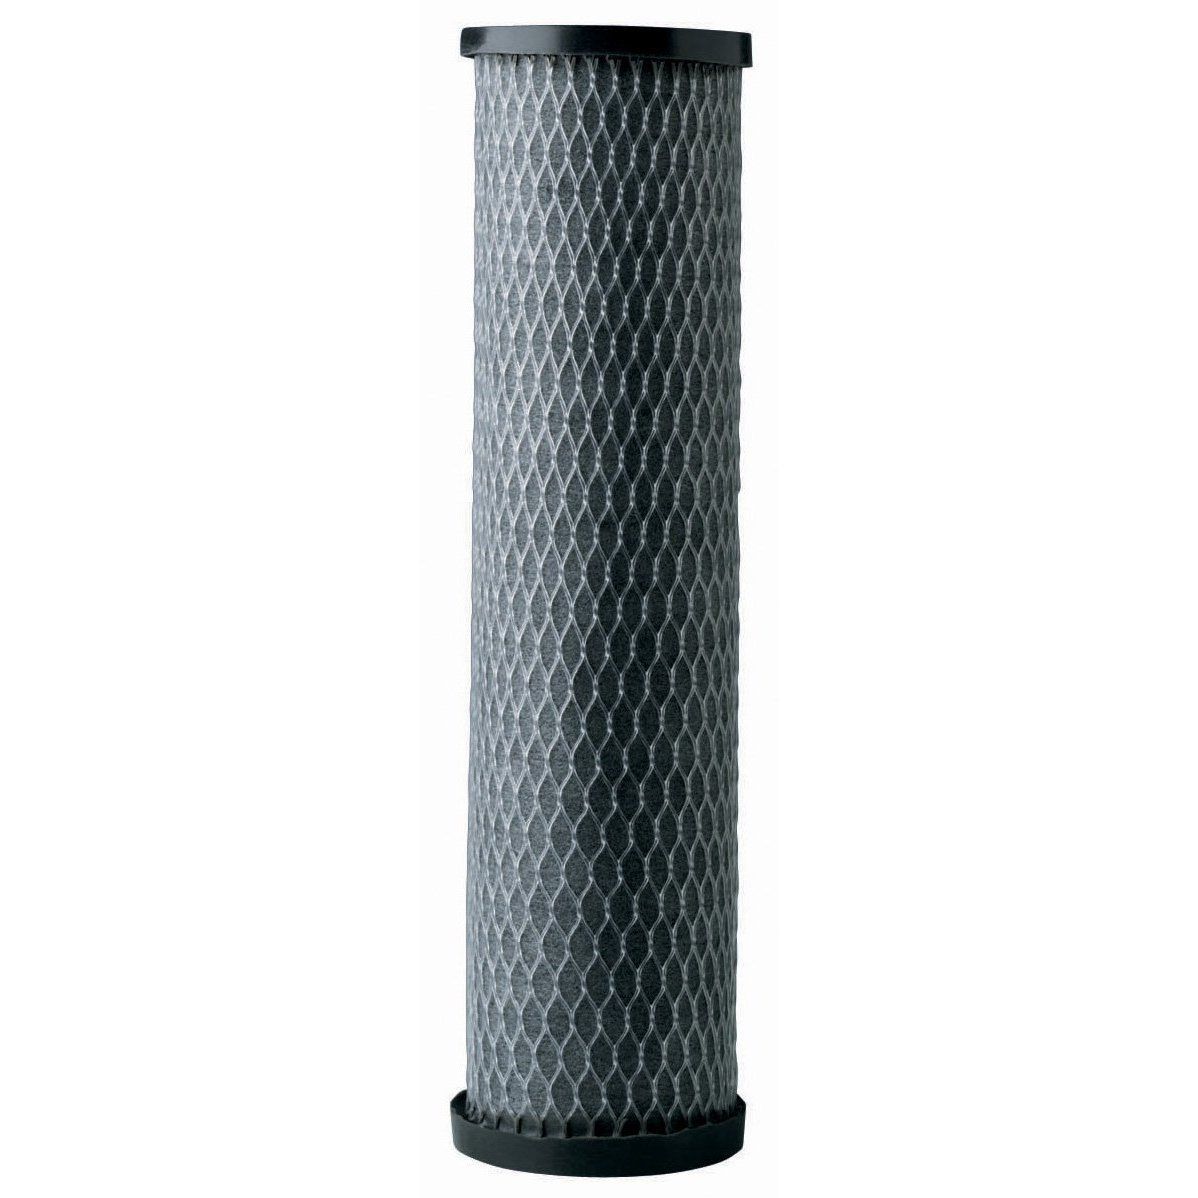  Omni T01 DS Whole House Water Filter Replacement Cartridge Carbon Wrap